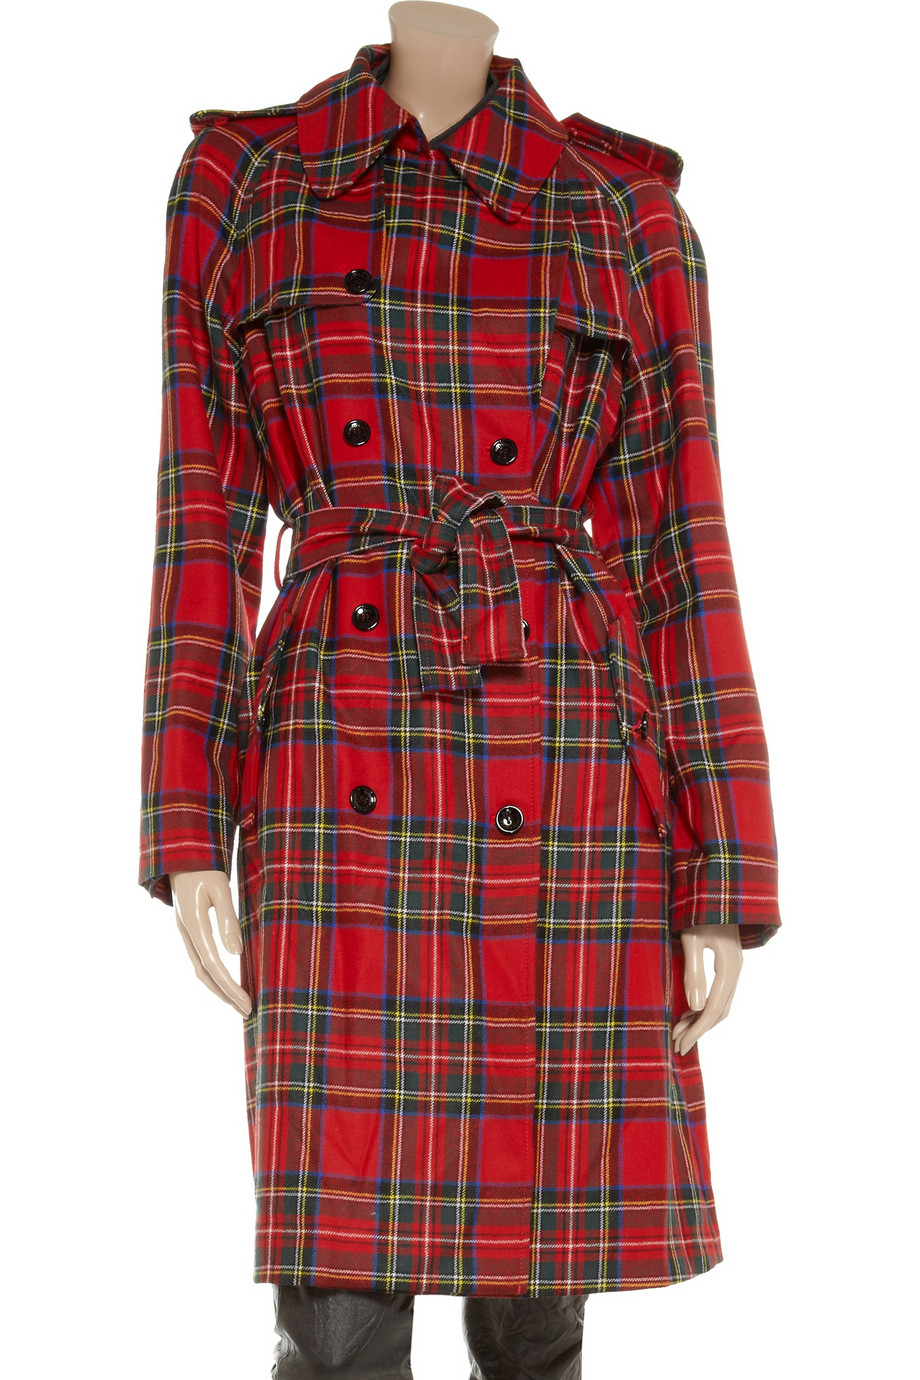 Dolce & Gabbana Plaid Wool Trench Coat in Red - Lyst